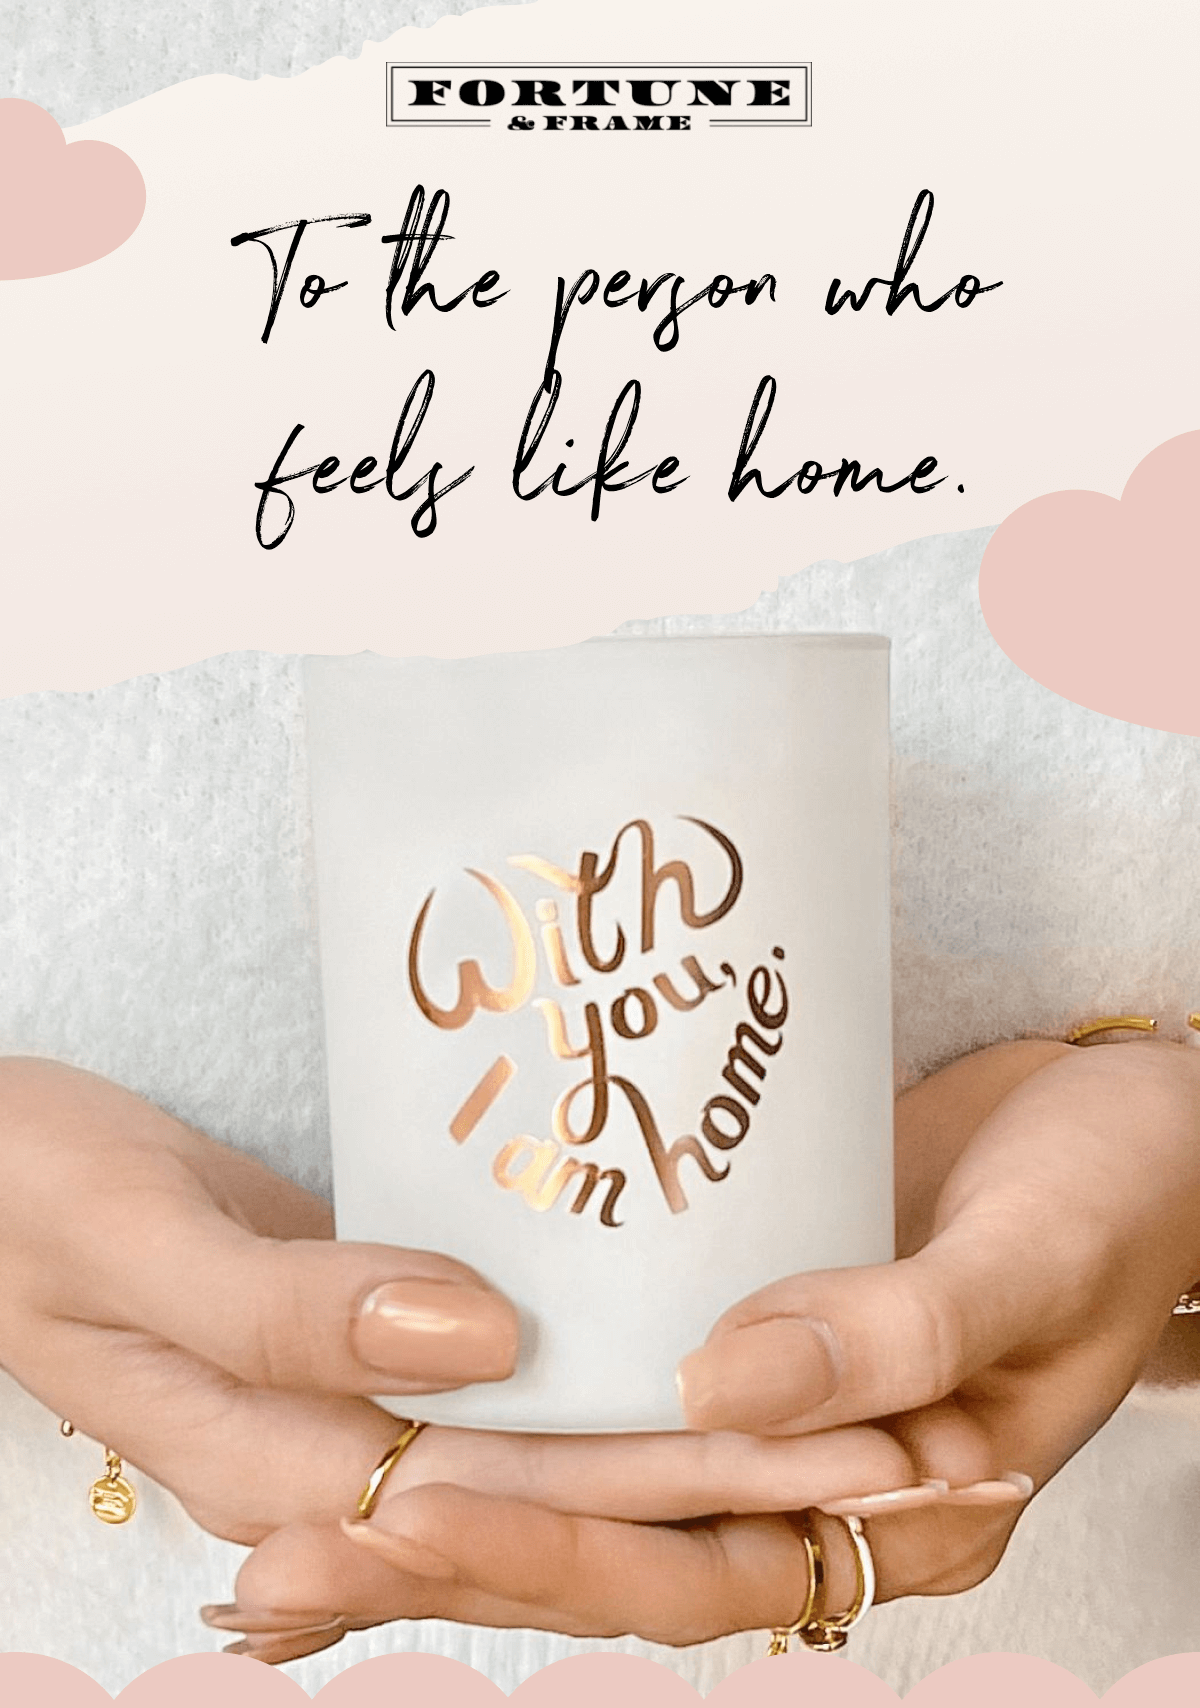 To the person who feels like home.